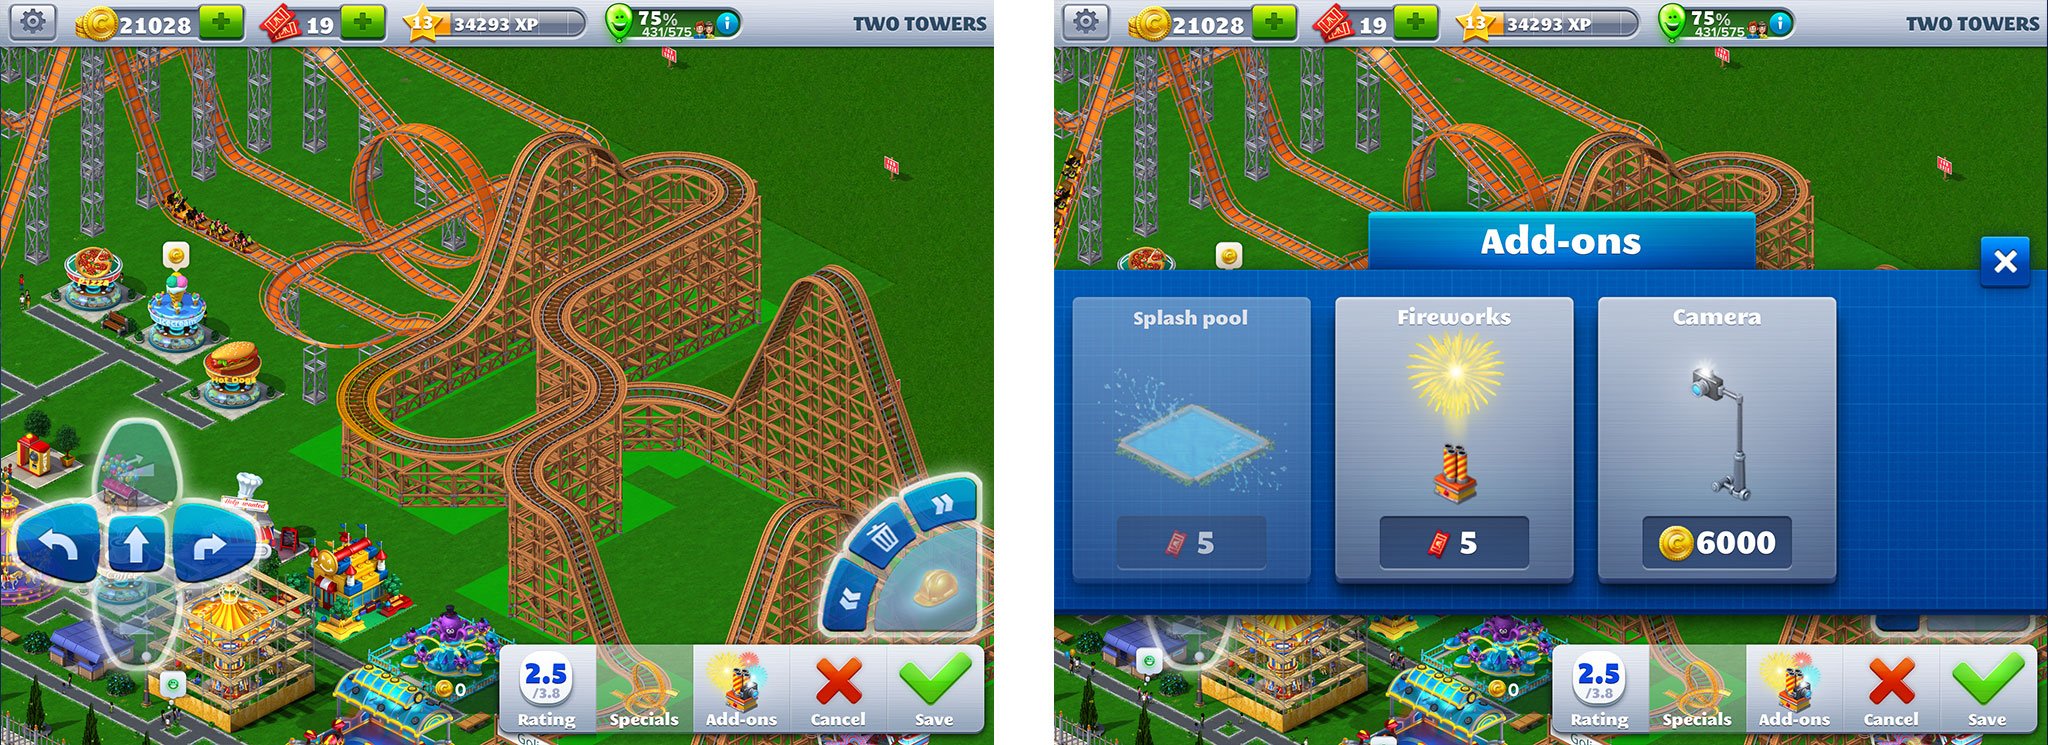 Roller Coaster Tycoon 4 Top 10 Tips Hints And Cheats You Need